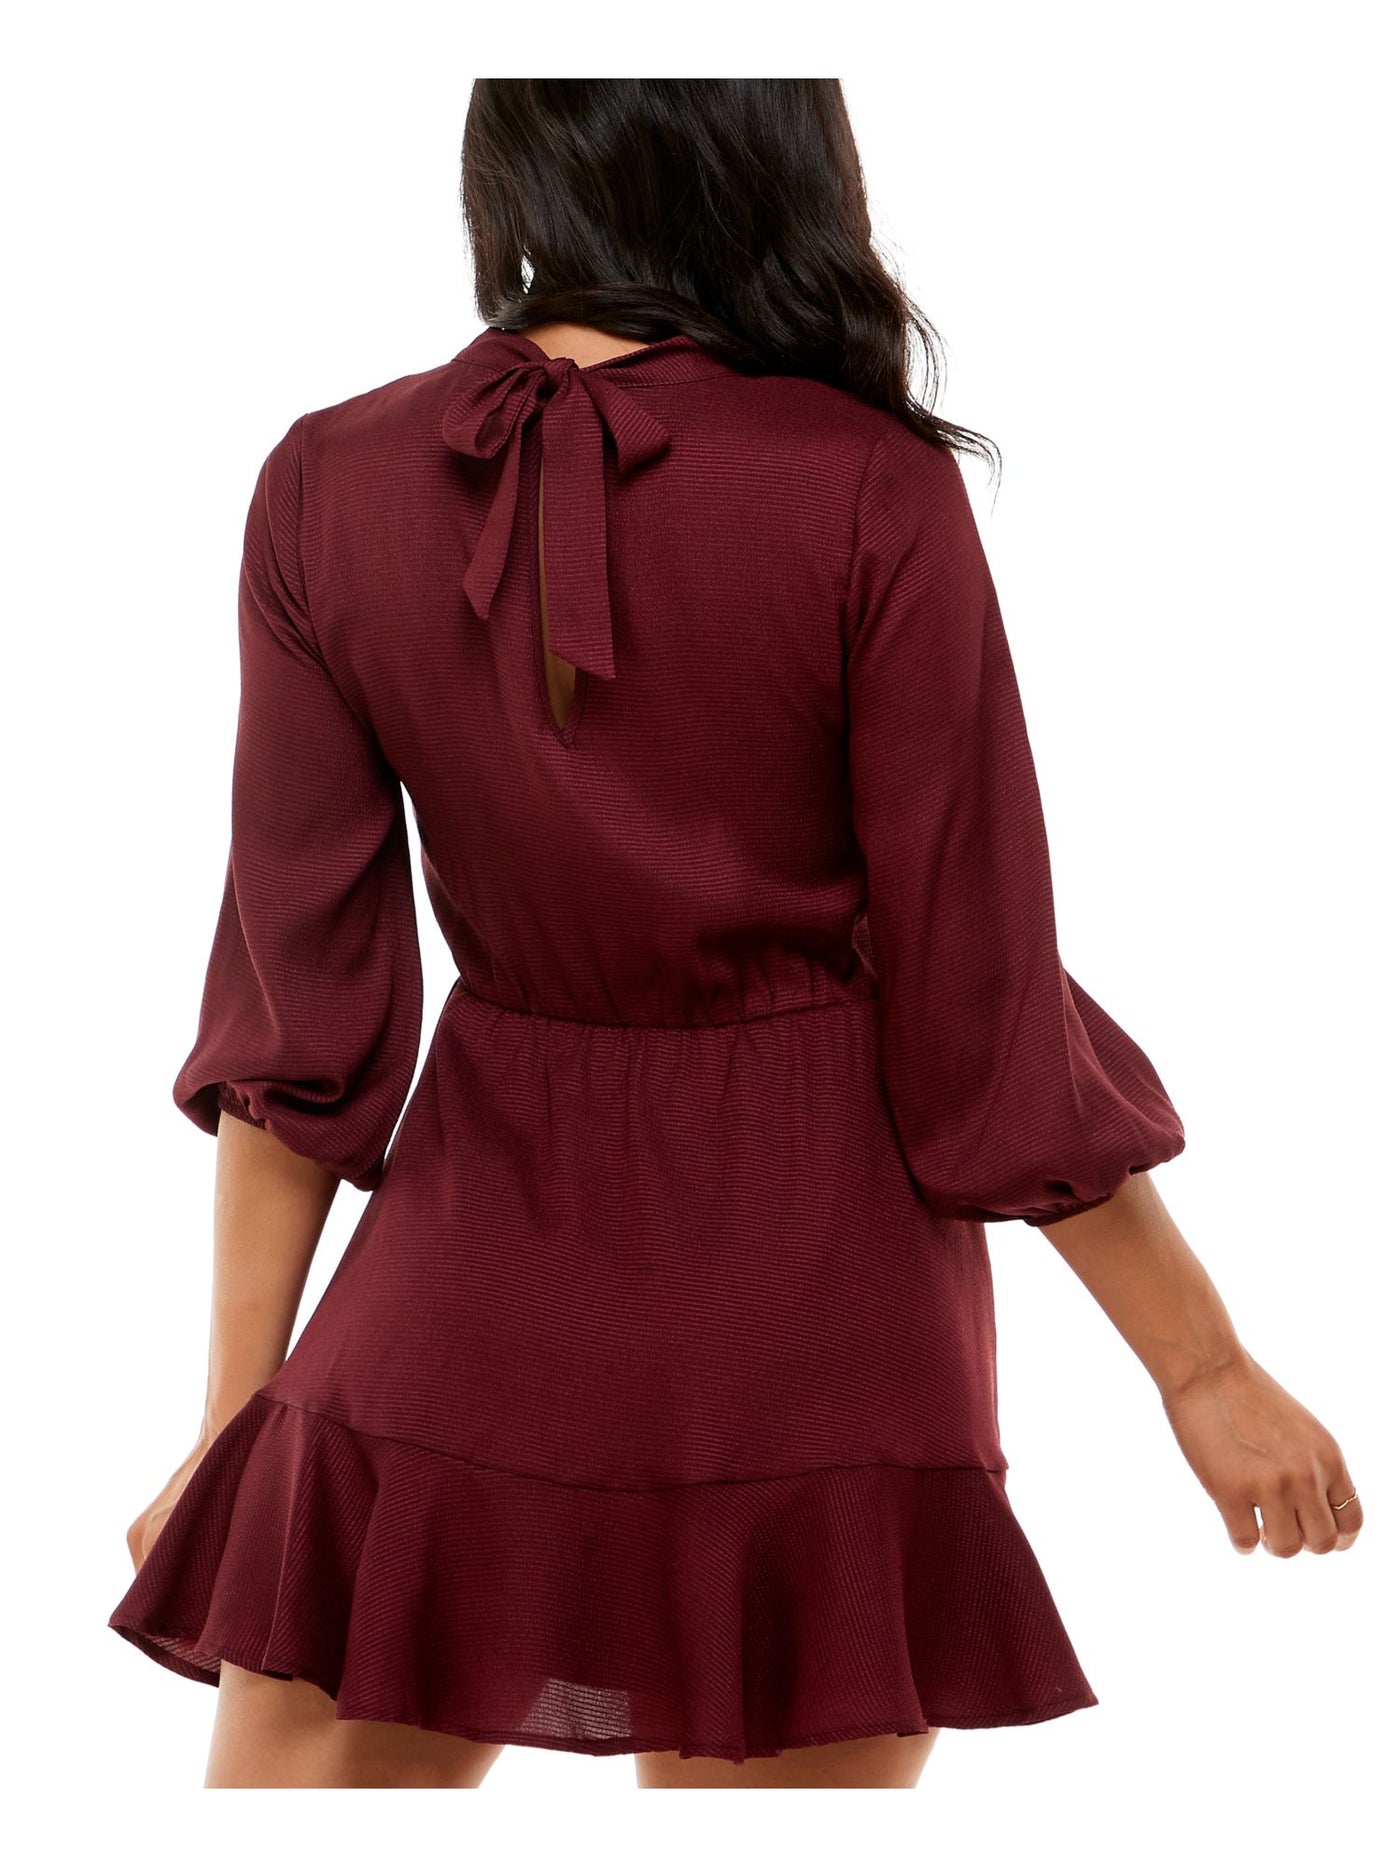 SPEECHLESS Womens Red Textured Pleated Ruffled Hem 3/4 Sleeve Tie Neck Mini Party Fit + Flare Dress Juniors 2XL